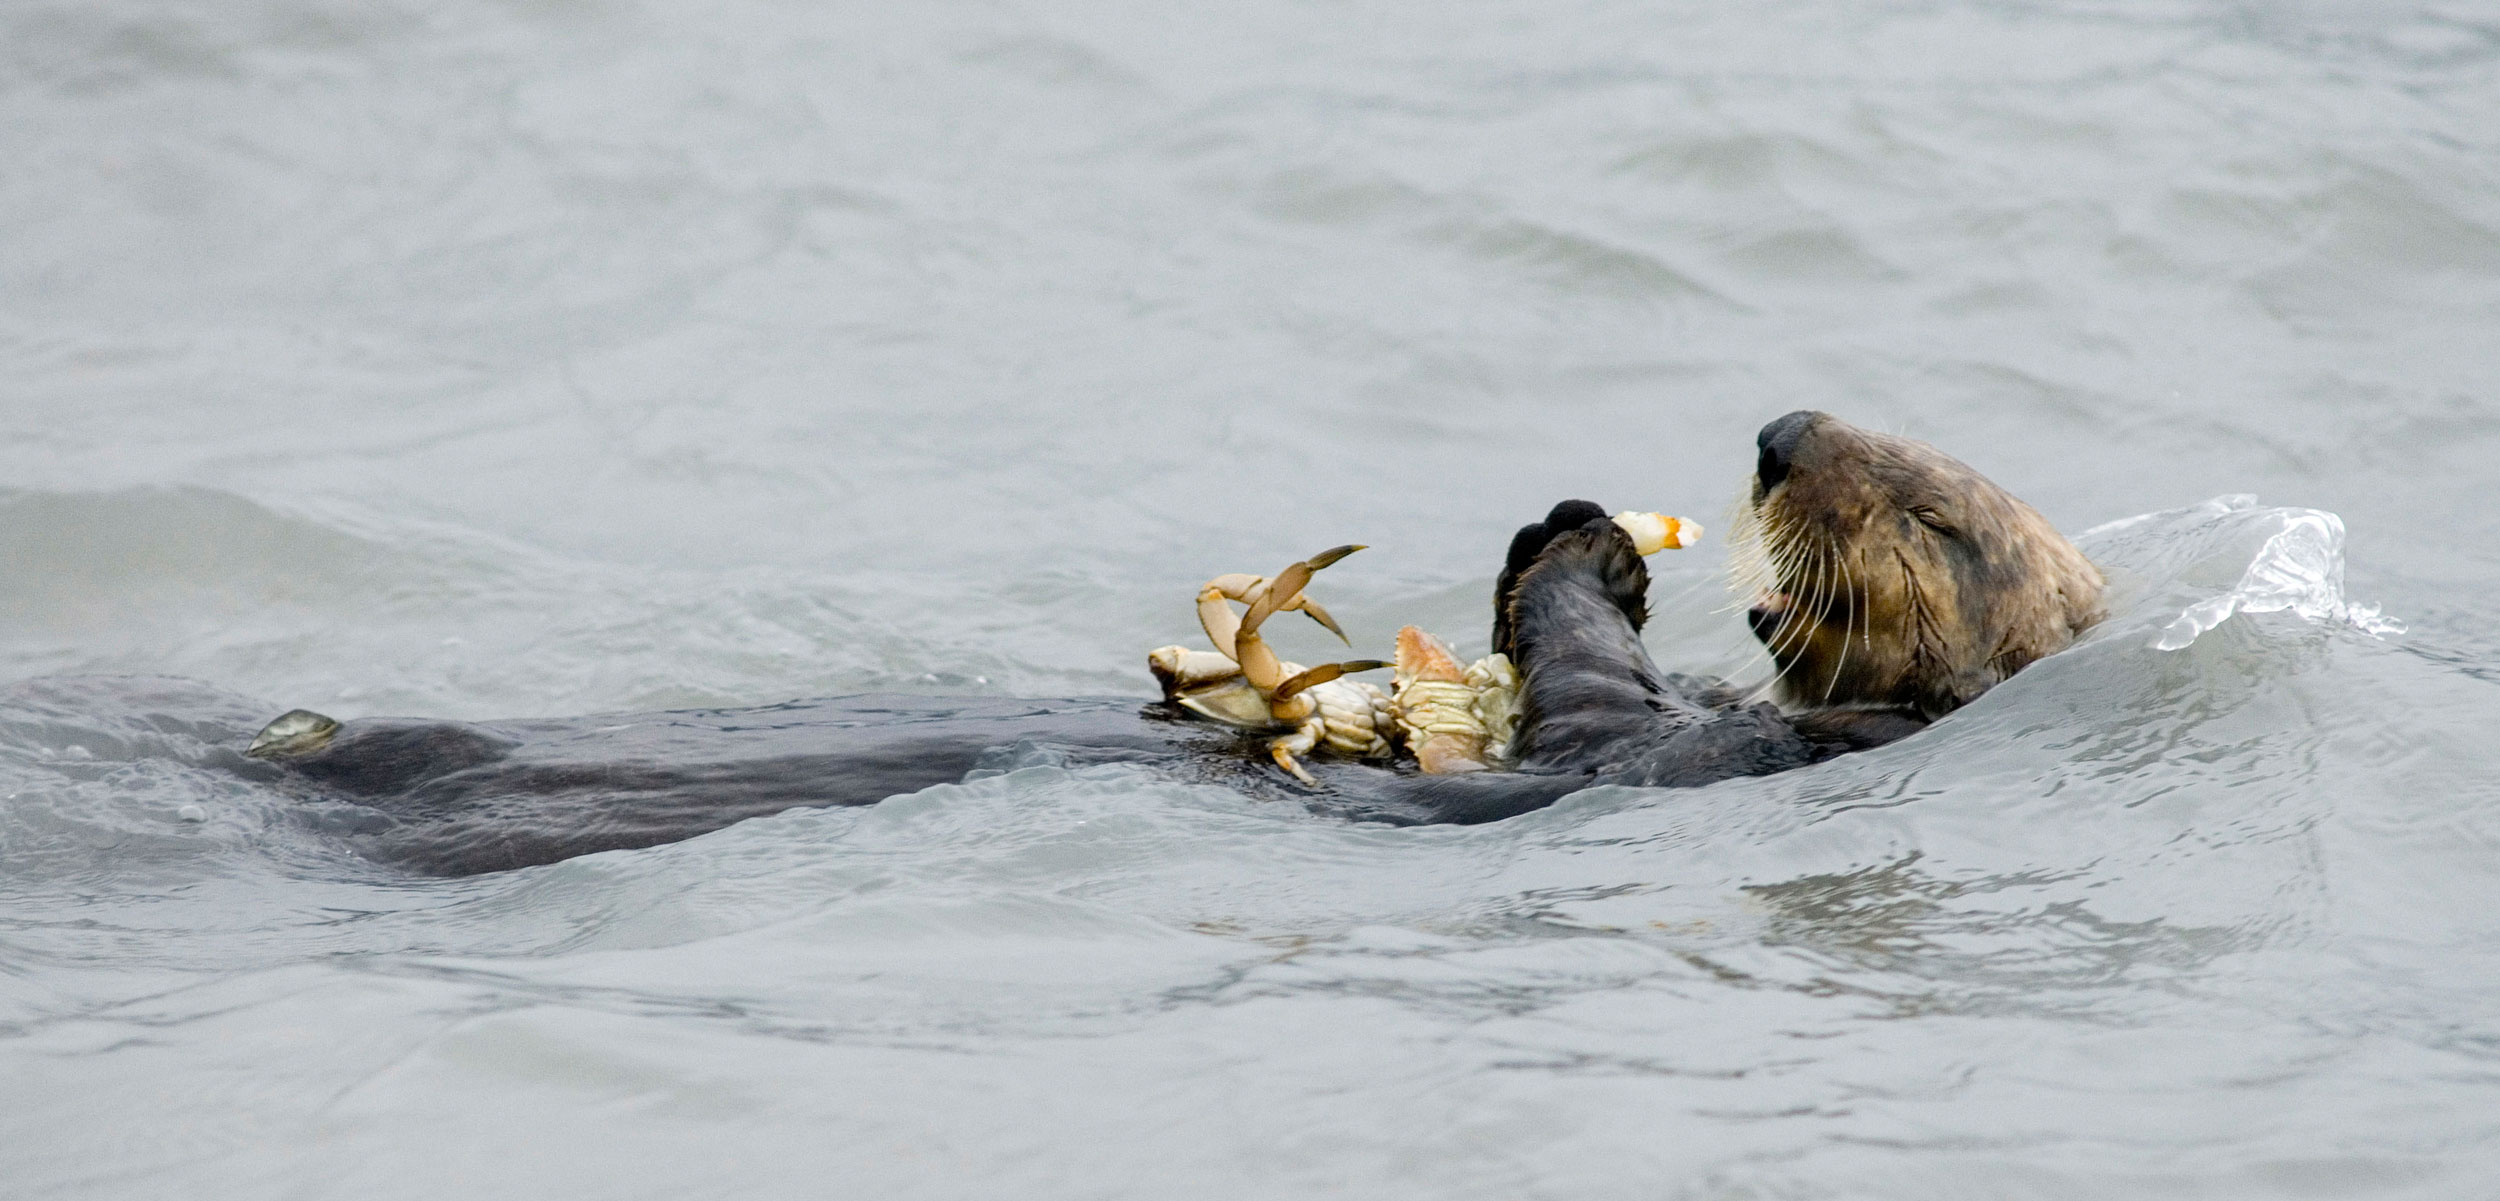 Sea otter (Enhydra lutris) eating a dungeness crab